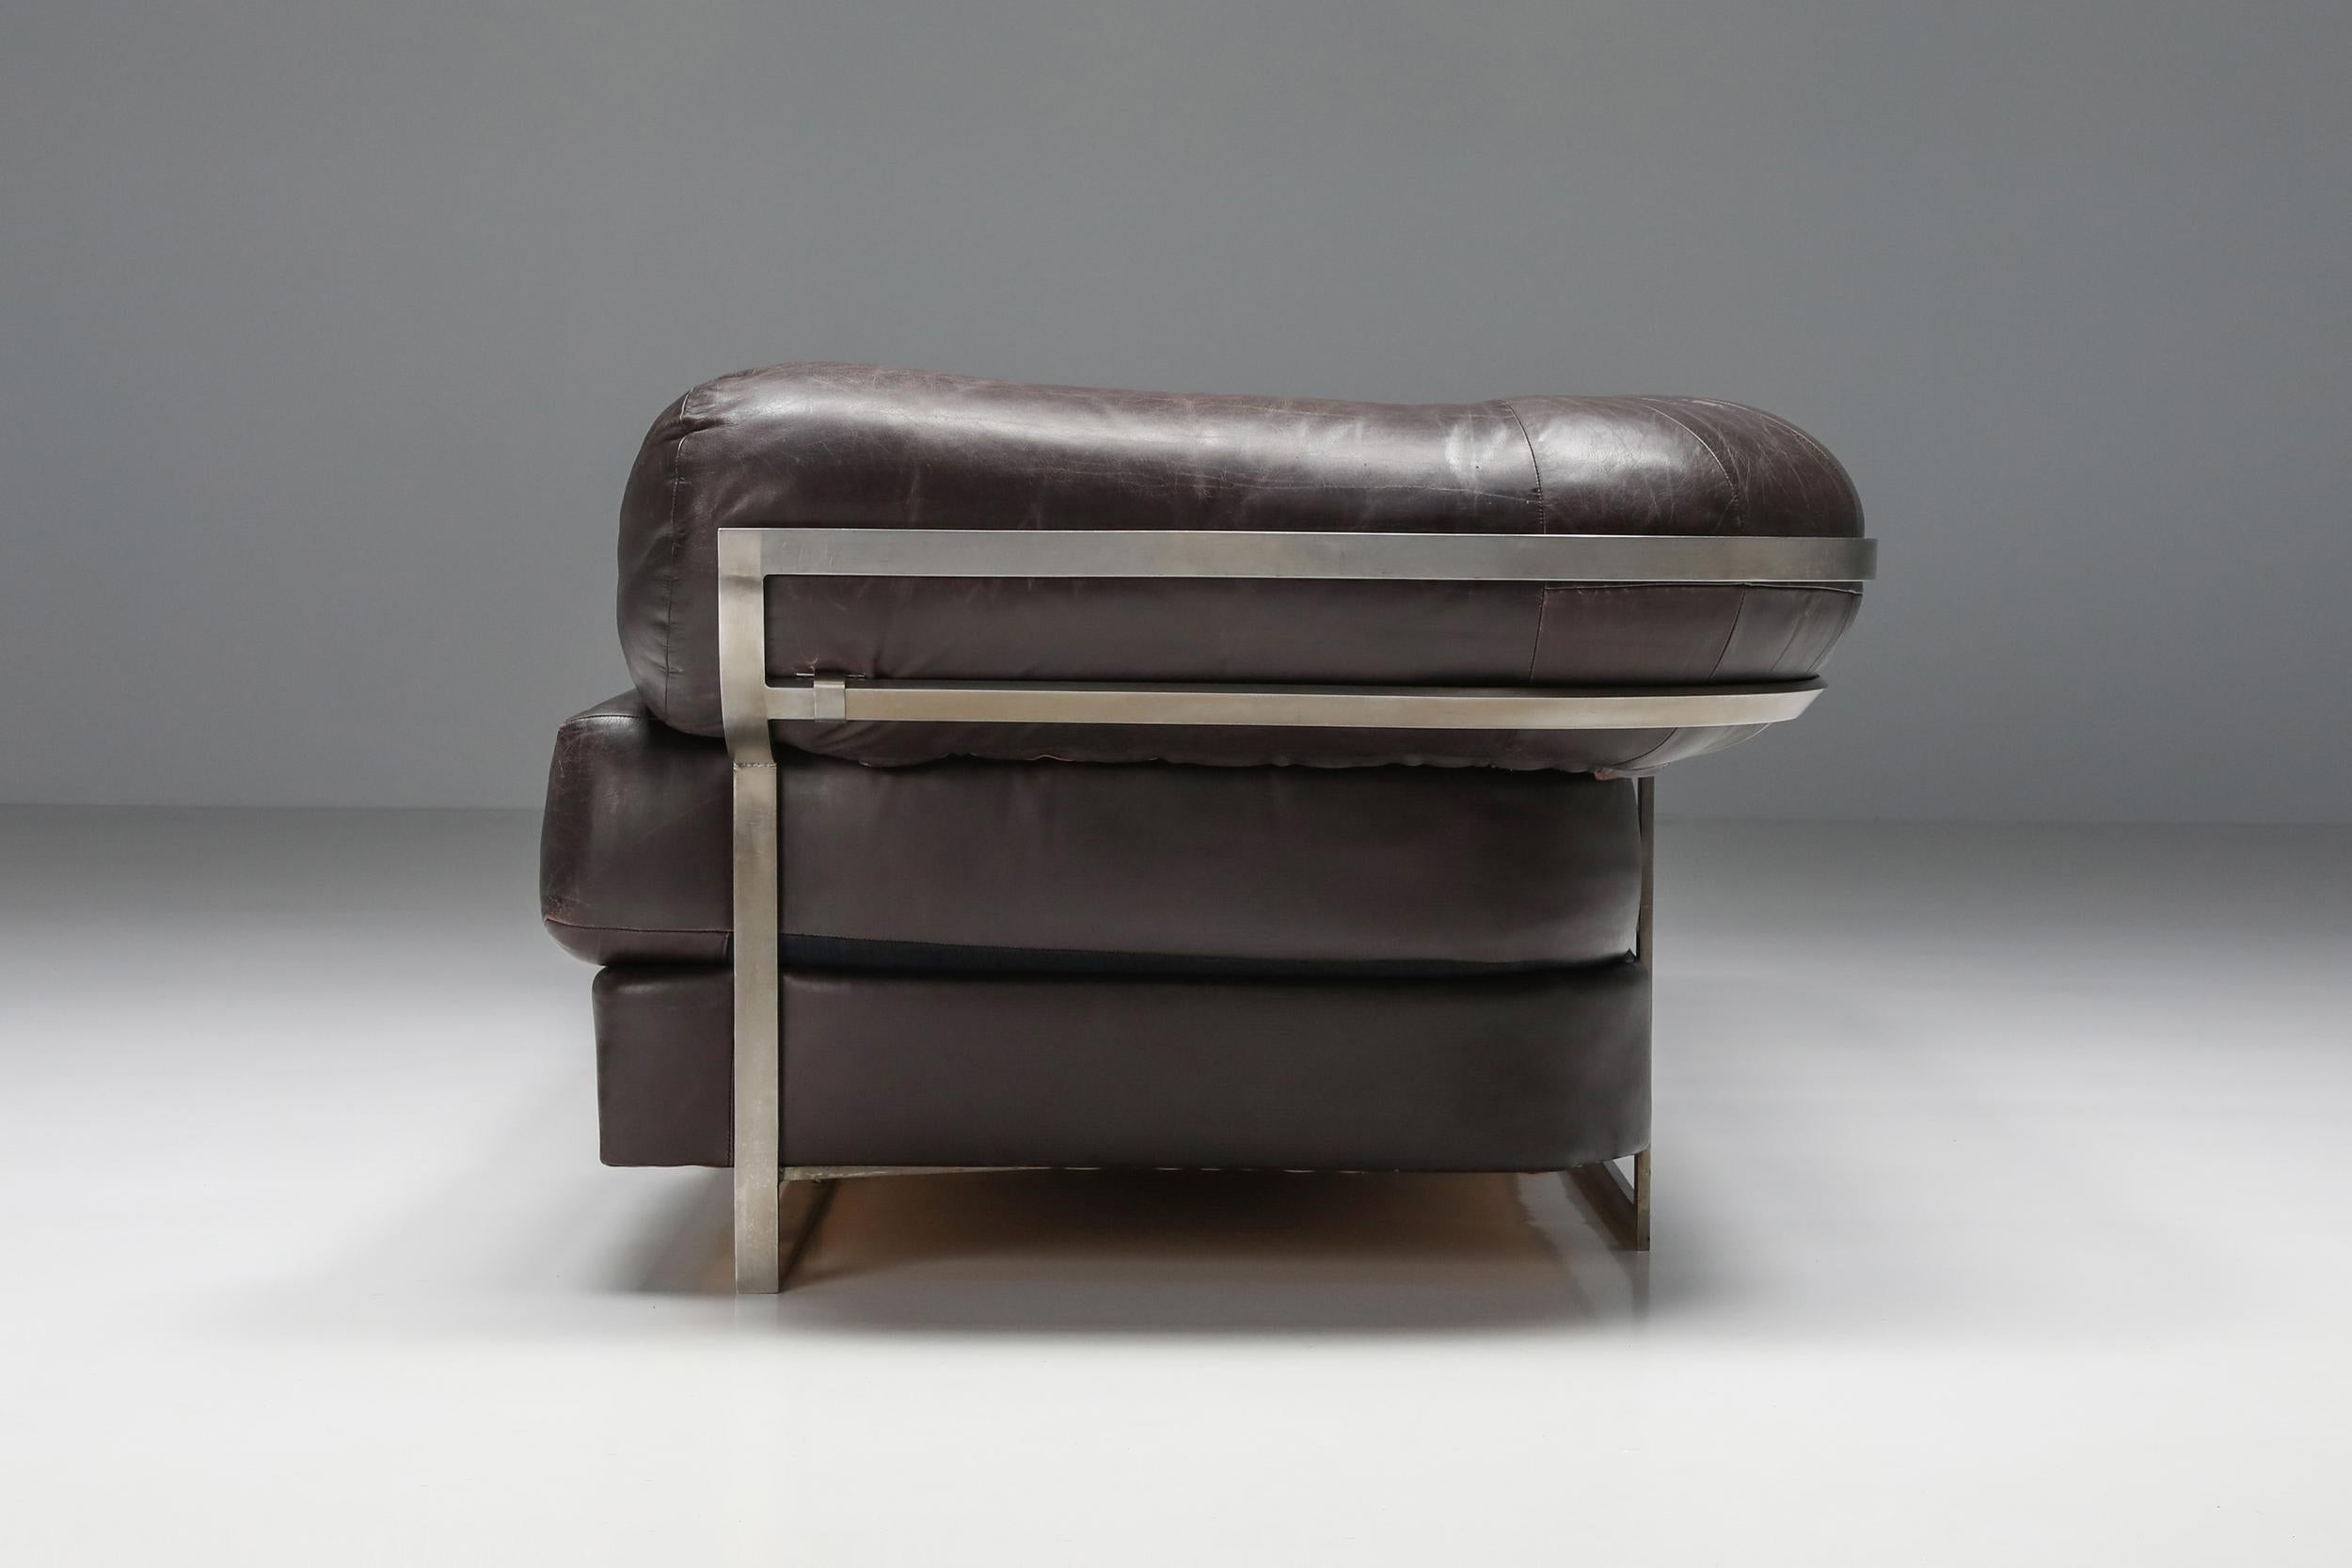 French Charpentier Brown Leather 'Apollo' Sofa in Stainless Steel Frame, 1960s